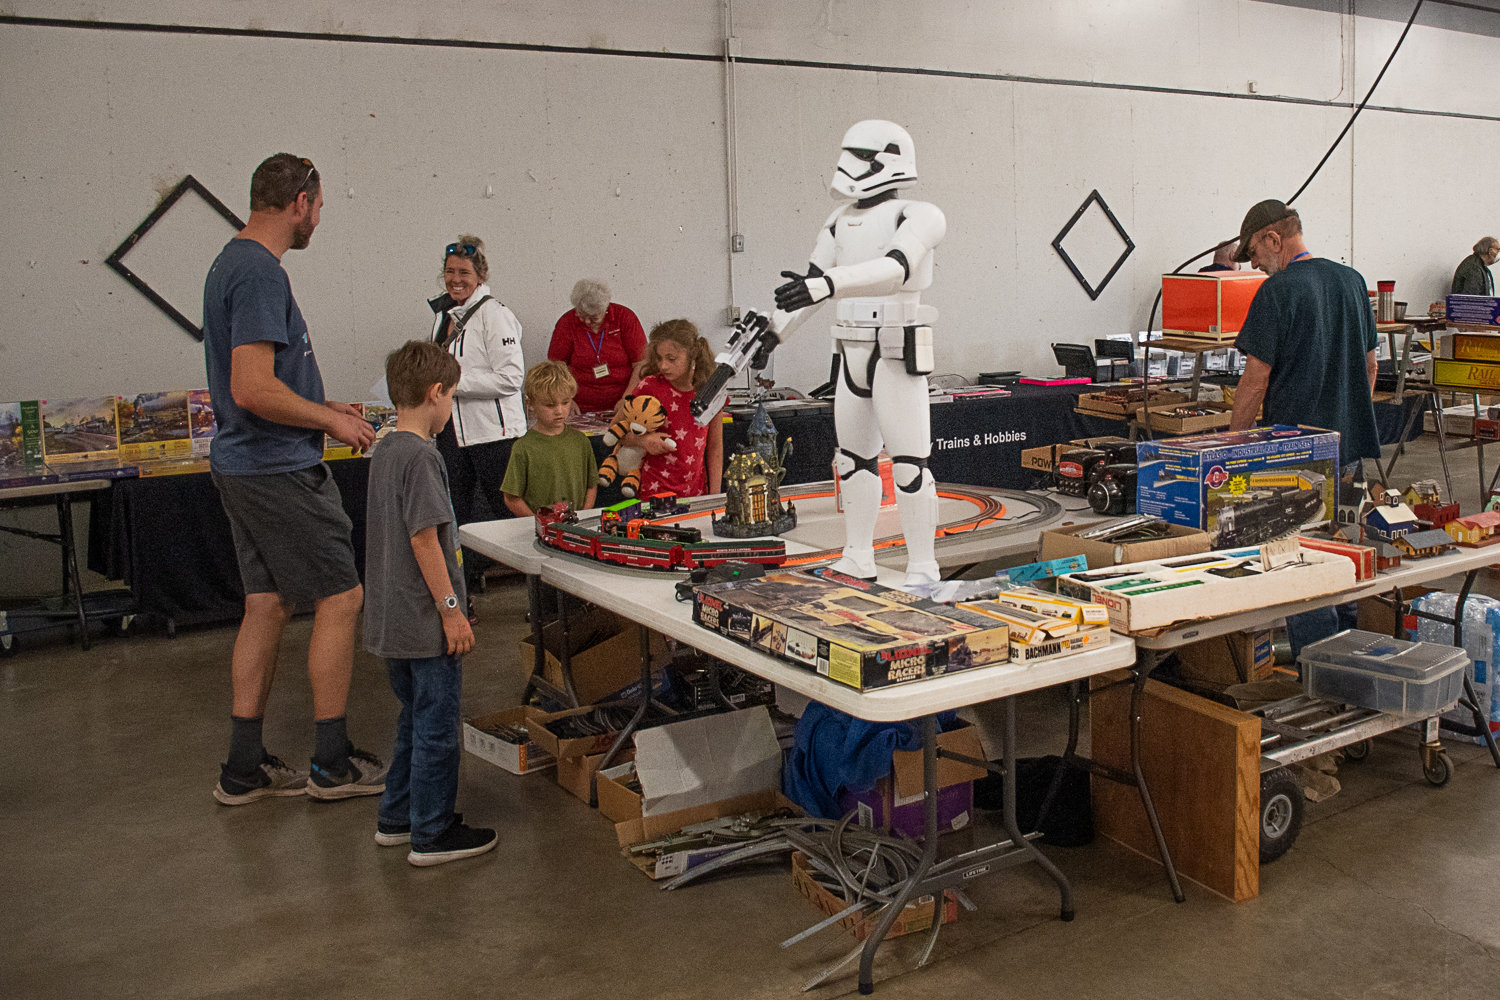 This storm trooper, along with plastic scale airplane models and puzzles were among some of the other items for sale at the Lewis County Model Railroad Club's swap meet.